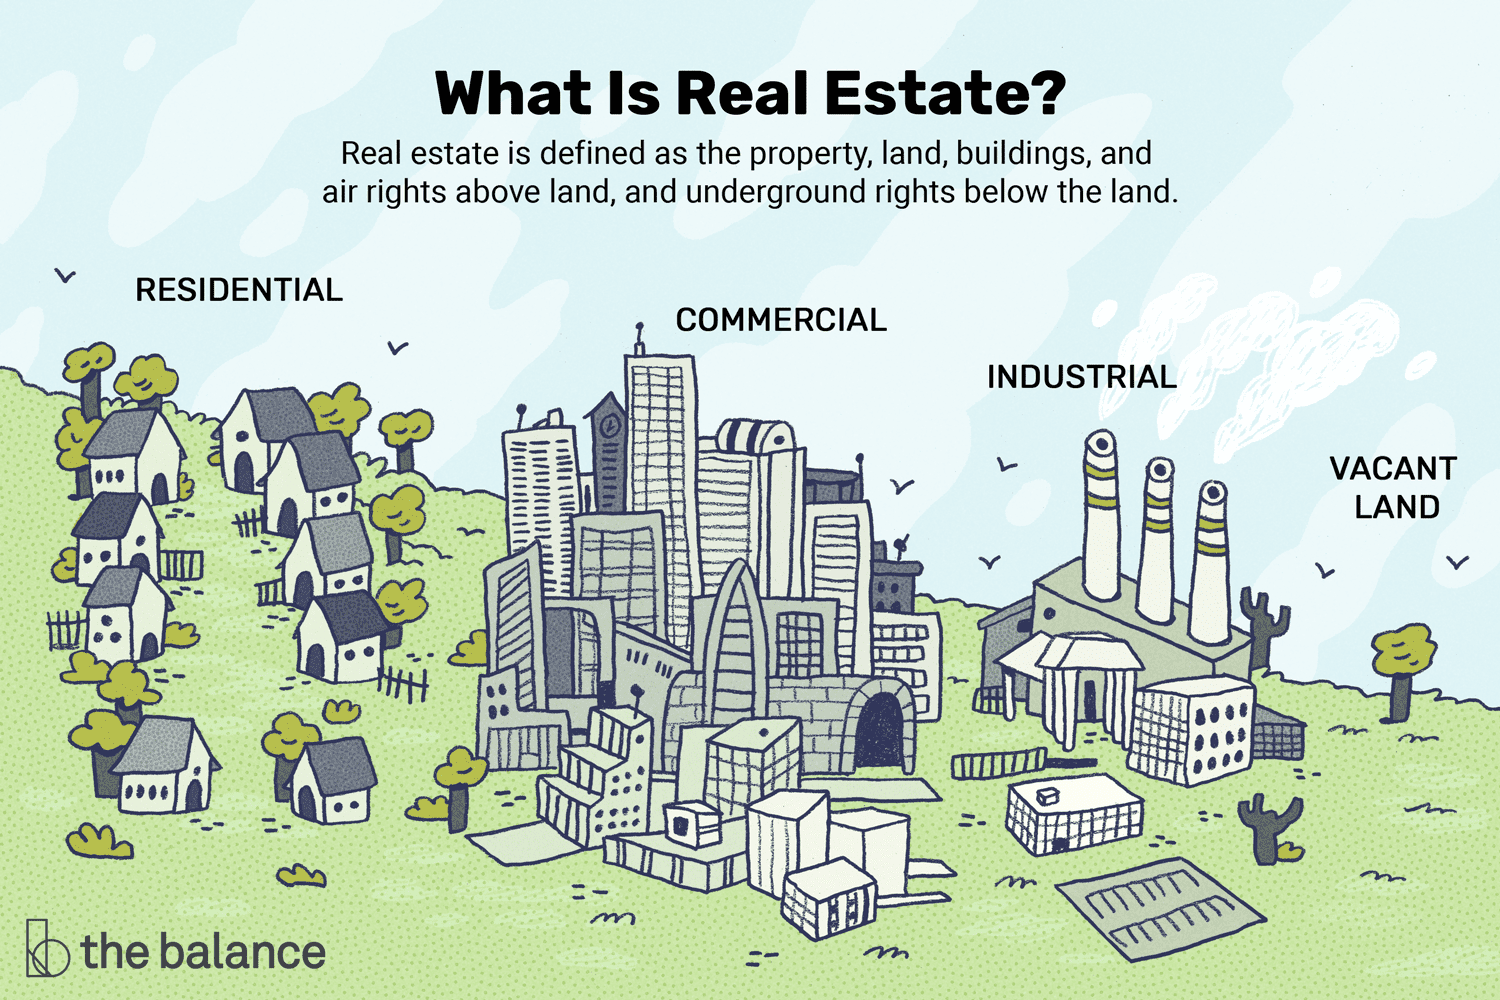 Real Estate: An Overview